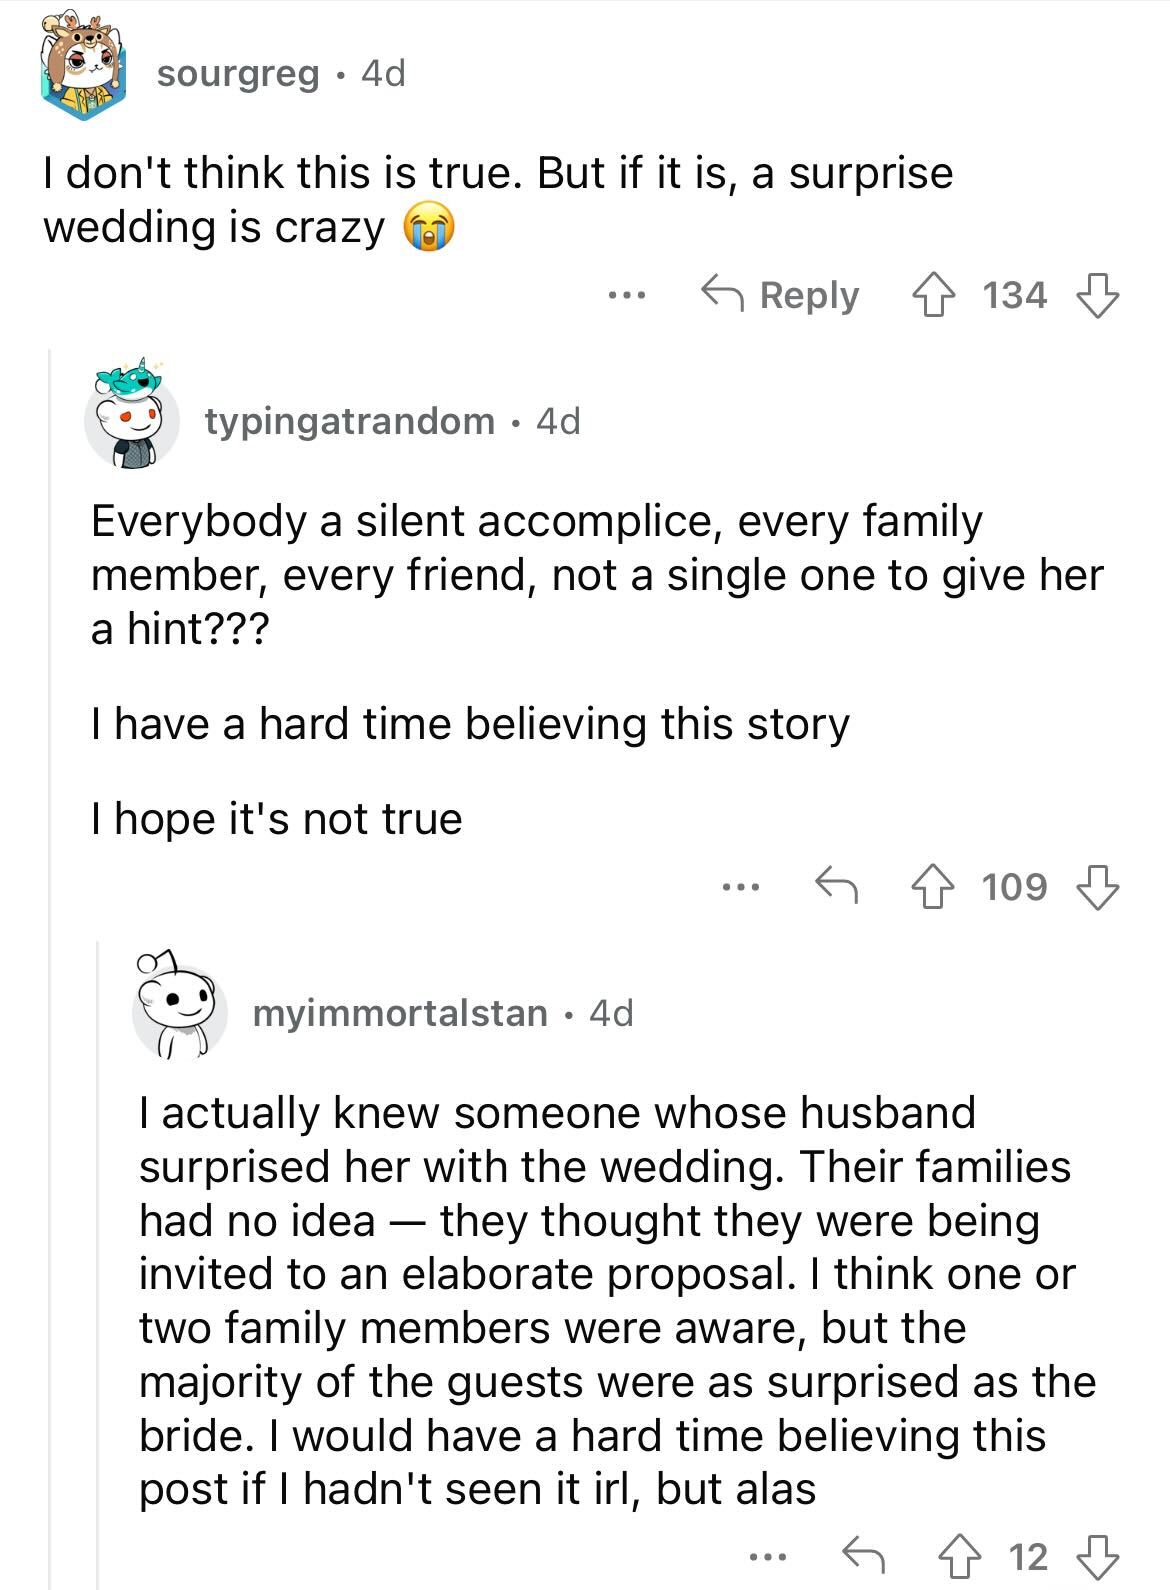 am i the asshole thread on reddit - document - sourgreg 4d I don't think this is true. But if it is, a surprise wedding is crazy ... typingatrandom . 4d Everybody a silent accomplice, every family member, every friend, not a single one to give her a hint?